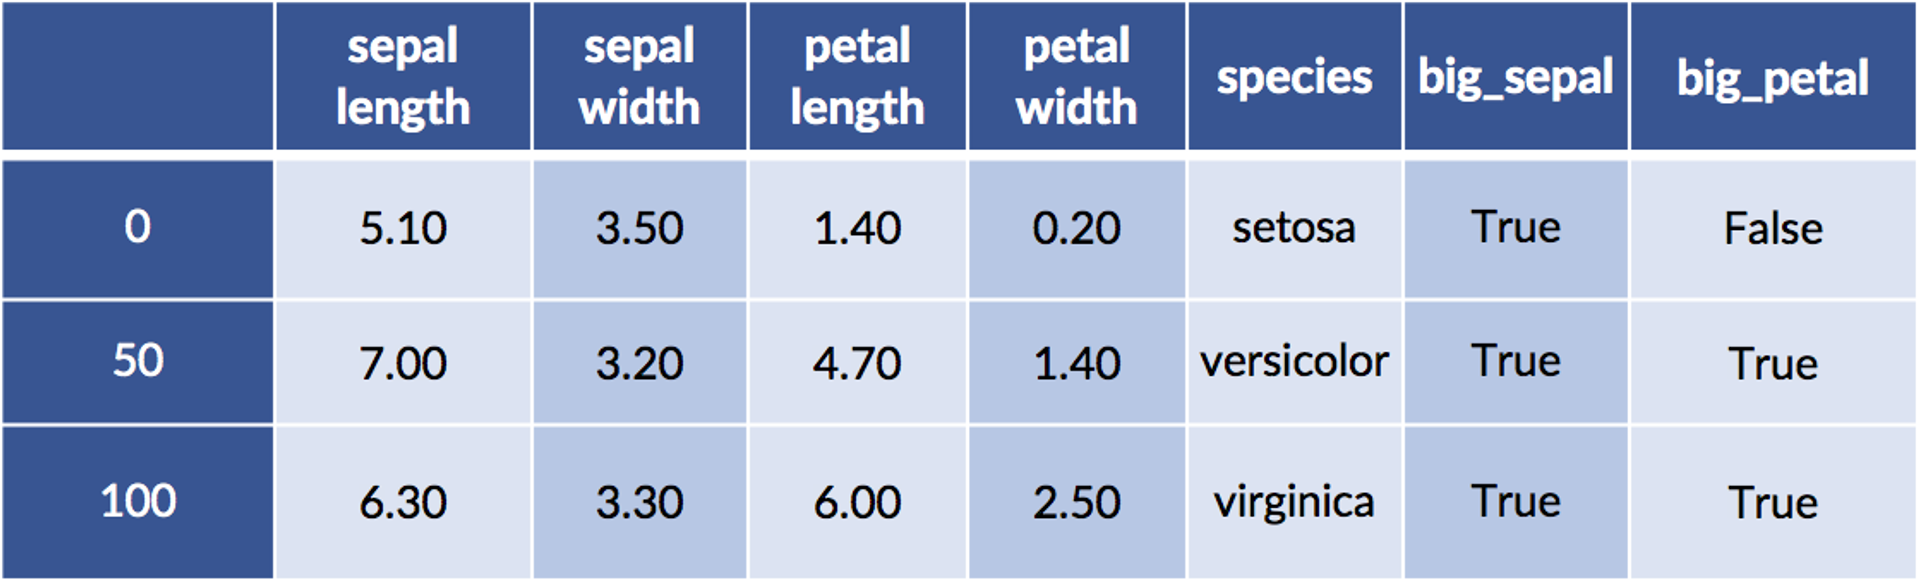 Combining smaller and larger petal data and discretizing